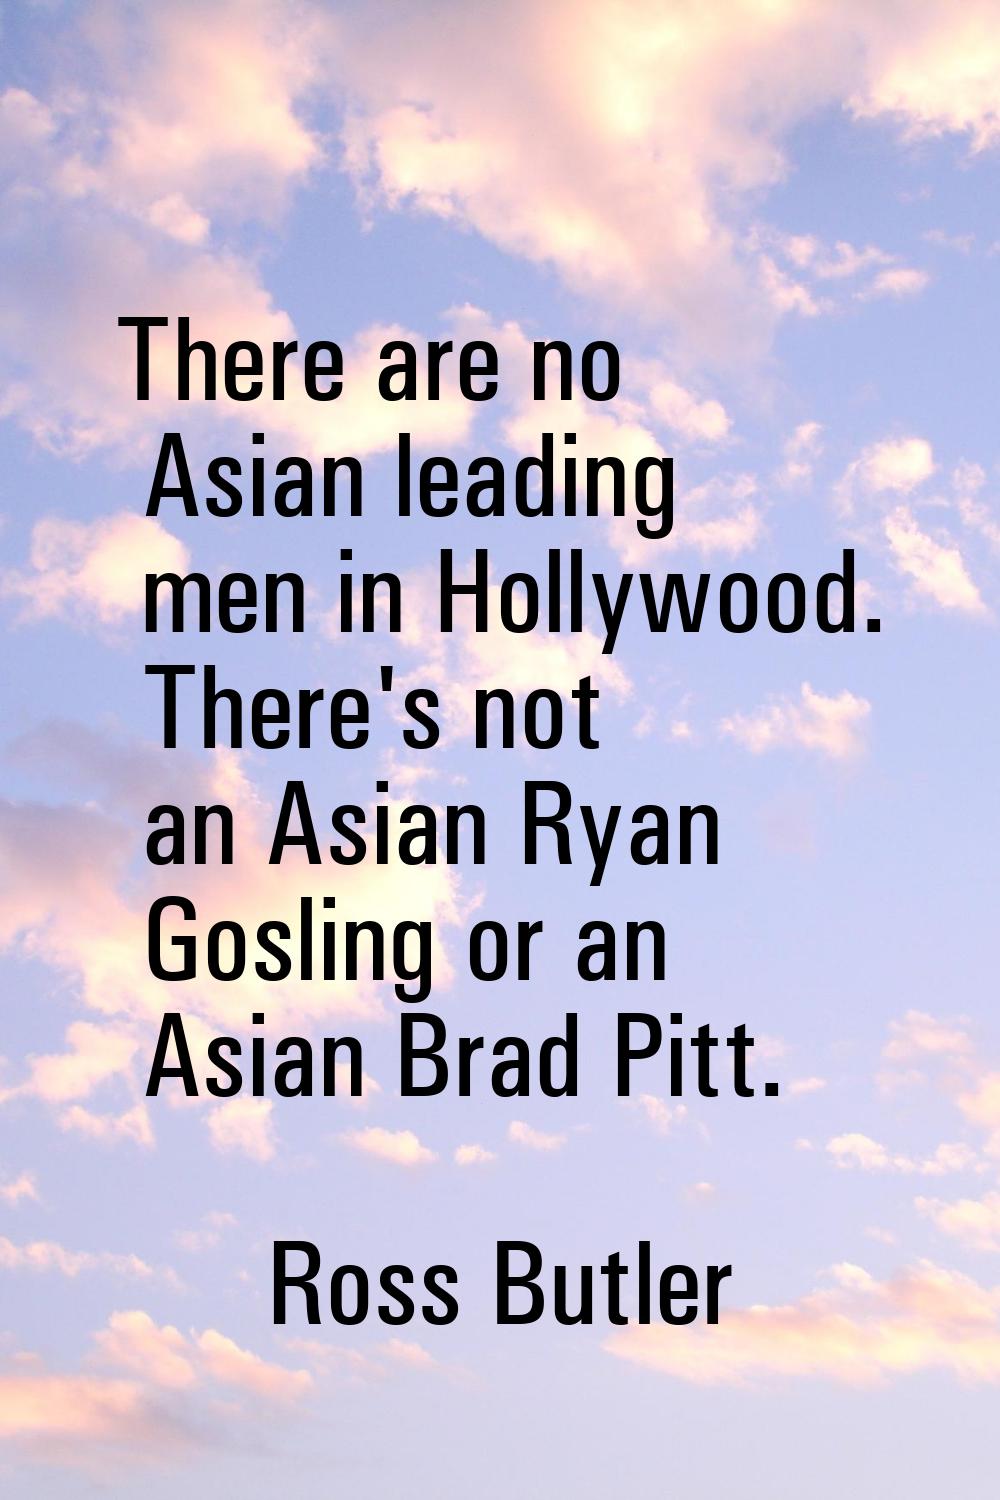 There are no Asian leading men in Hollywood. There's not an Asian Ryan Gosling or an Asian Brad Pit